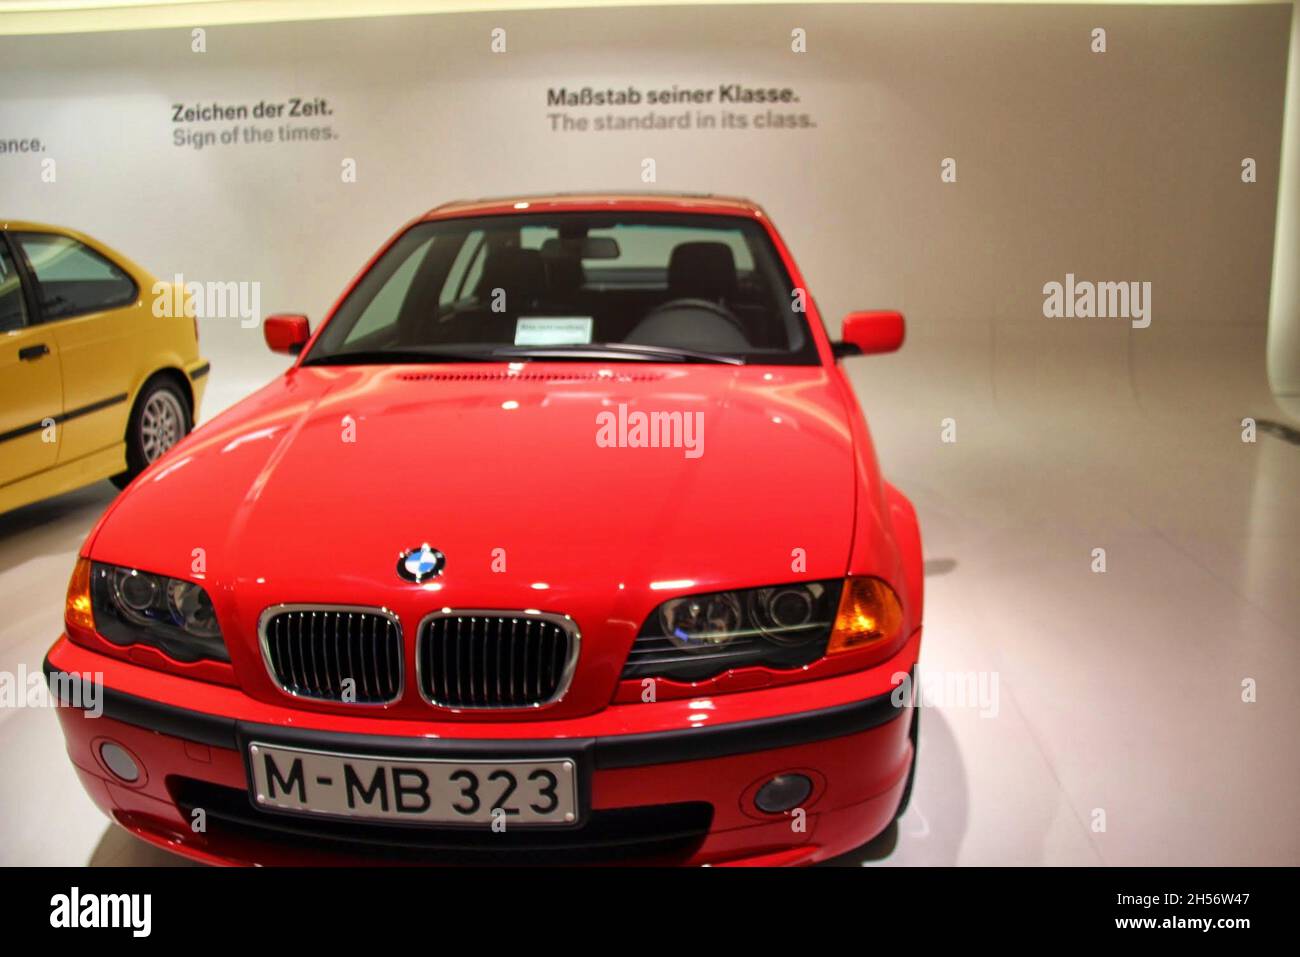 BMW 3 Series (E46): Front view, color red, 4th generation, manufactured from 1998 to 2006. BMW Museum, Munich - Germany - September 2013. Stock Photo